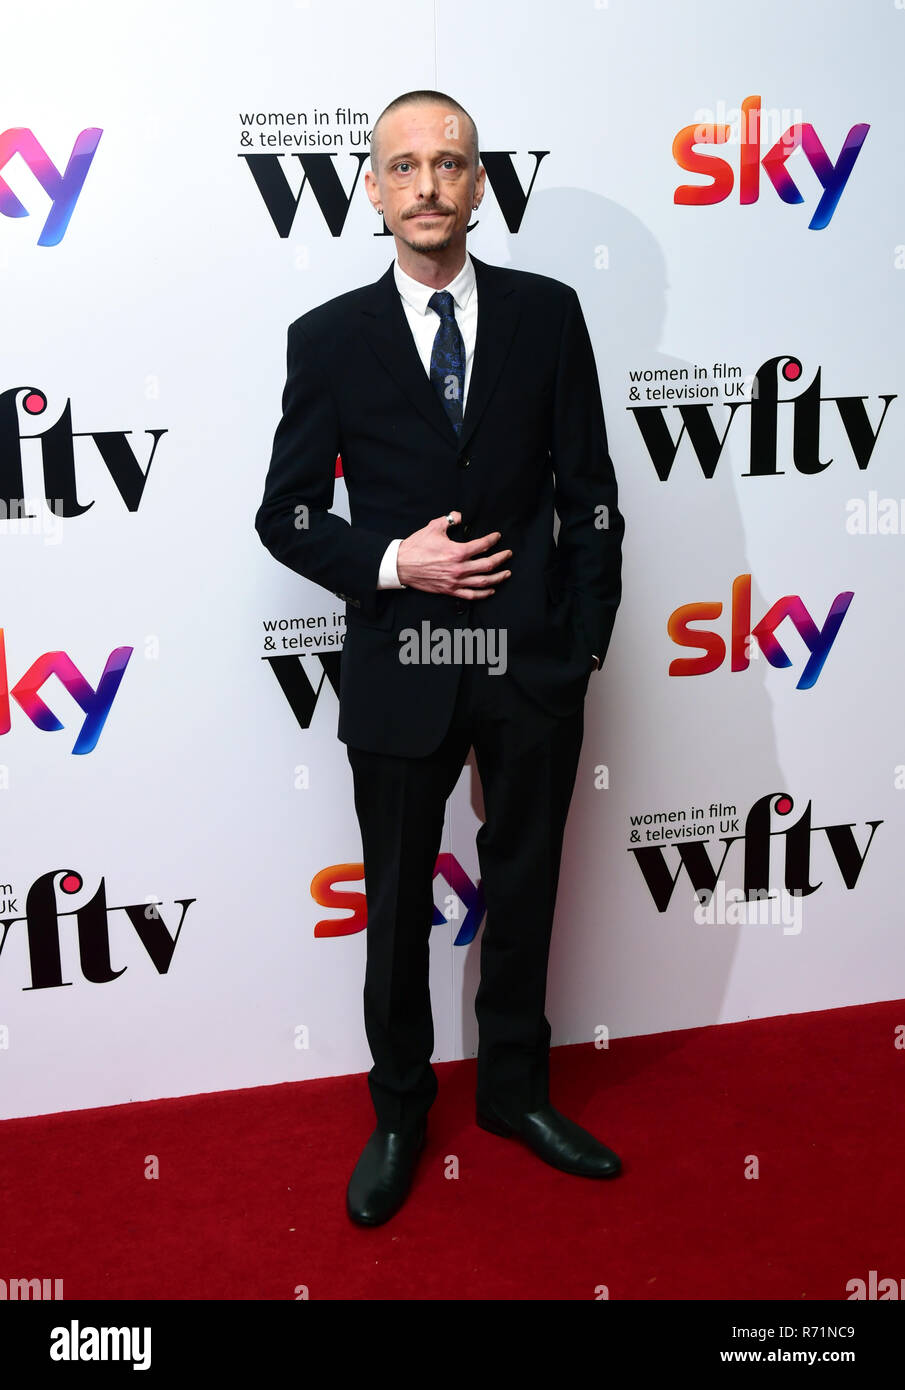 Mackenzie Crook attending the Women in Film and TV Awards 2018, held at the Hilton in London. Stock Photo